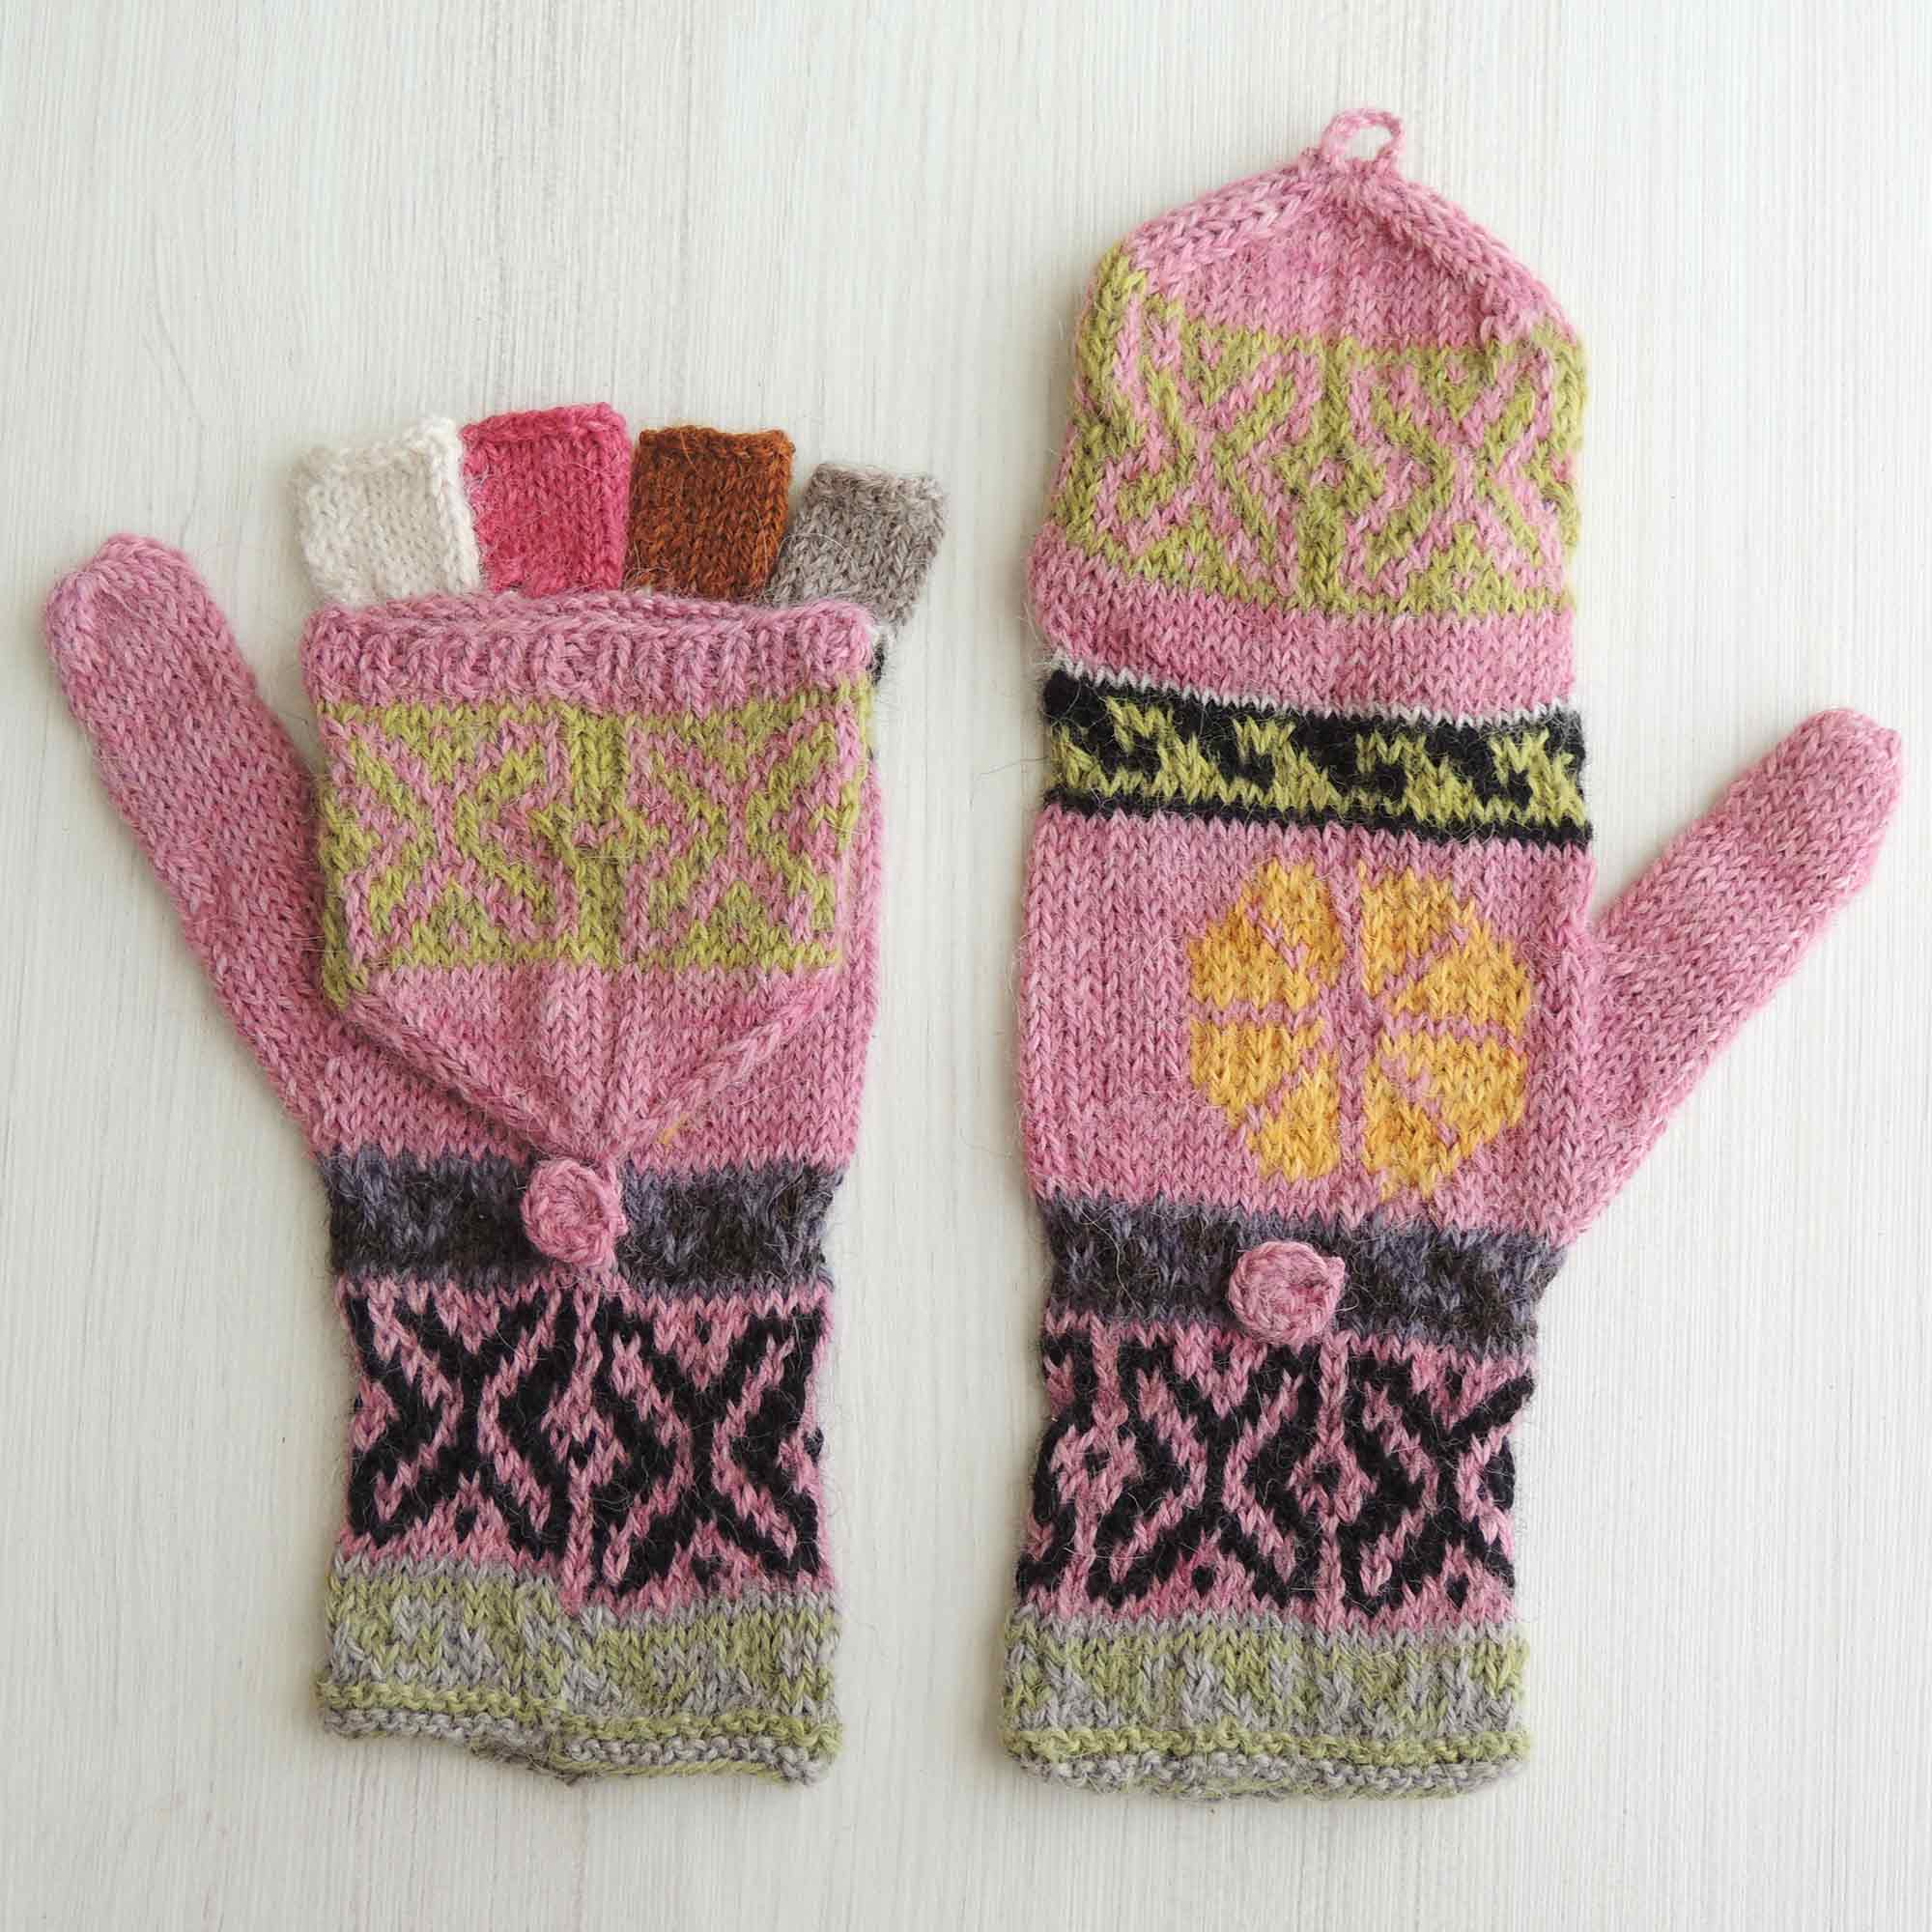 PopsFL knitwear producer wholesale Convertible fingerless mittens 100% alpaca hand knitted multi color natural dyes, fingerless gloves